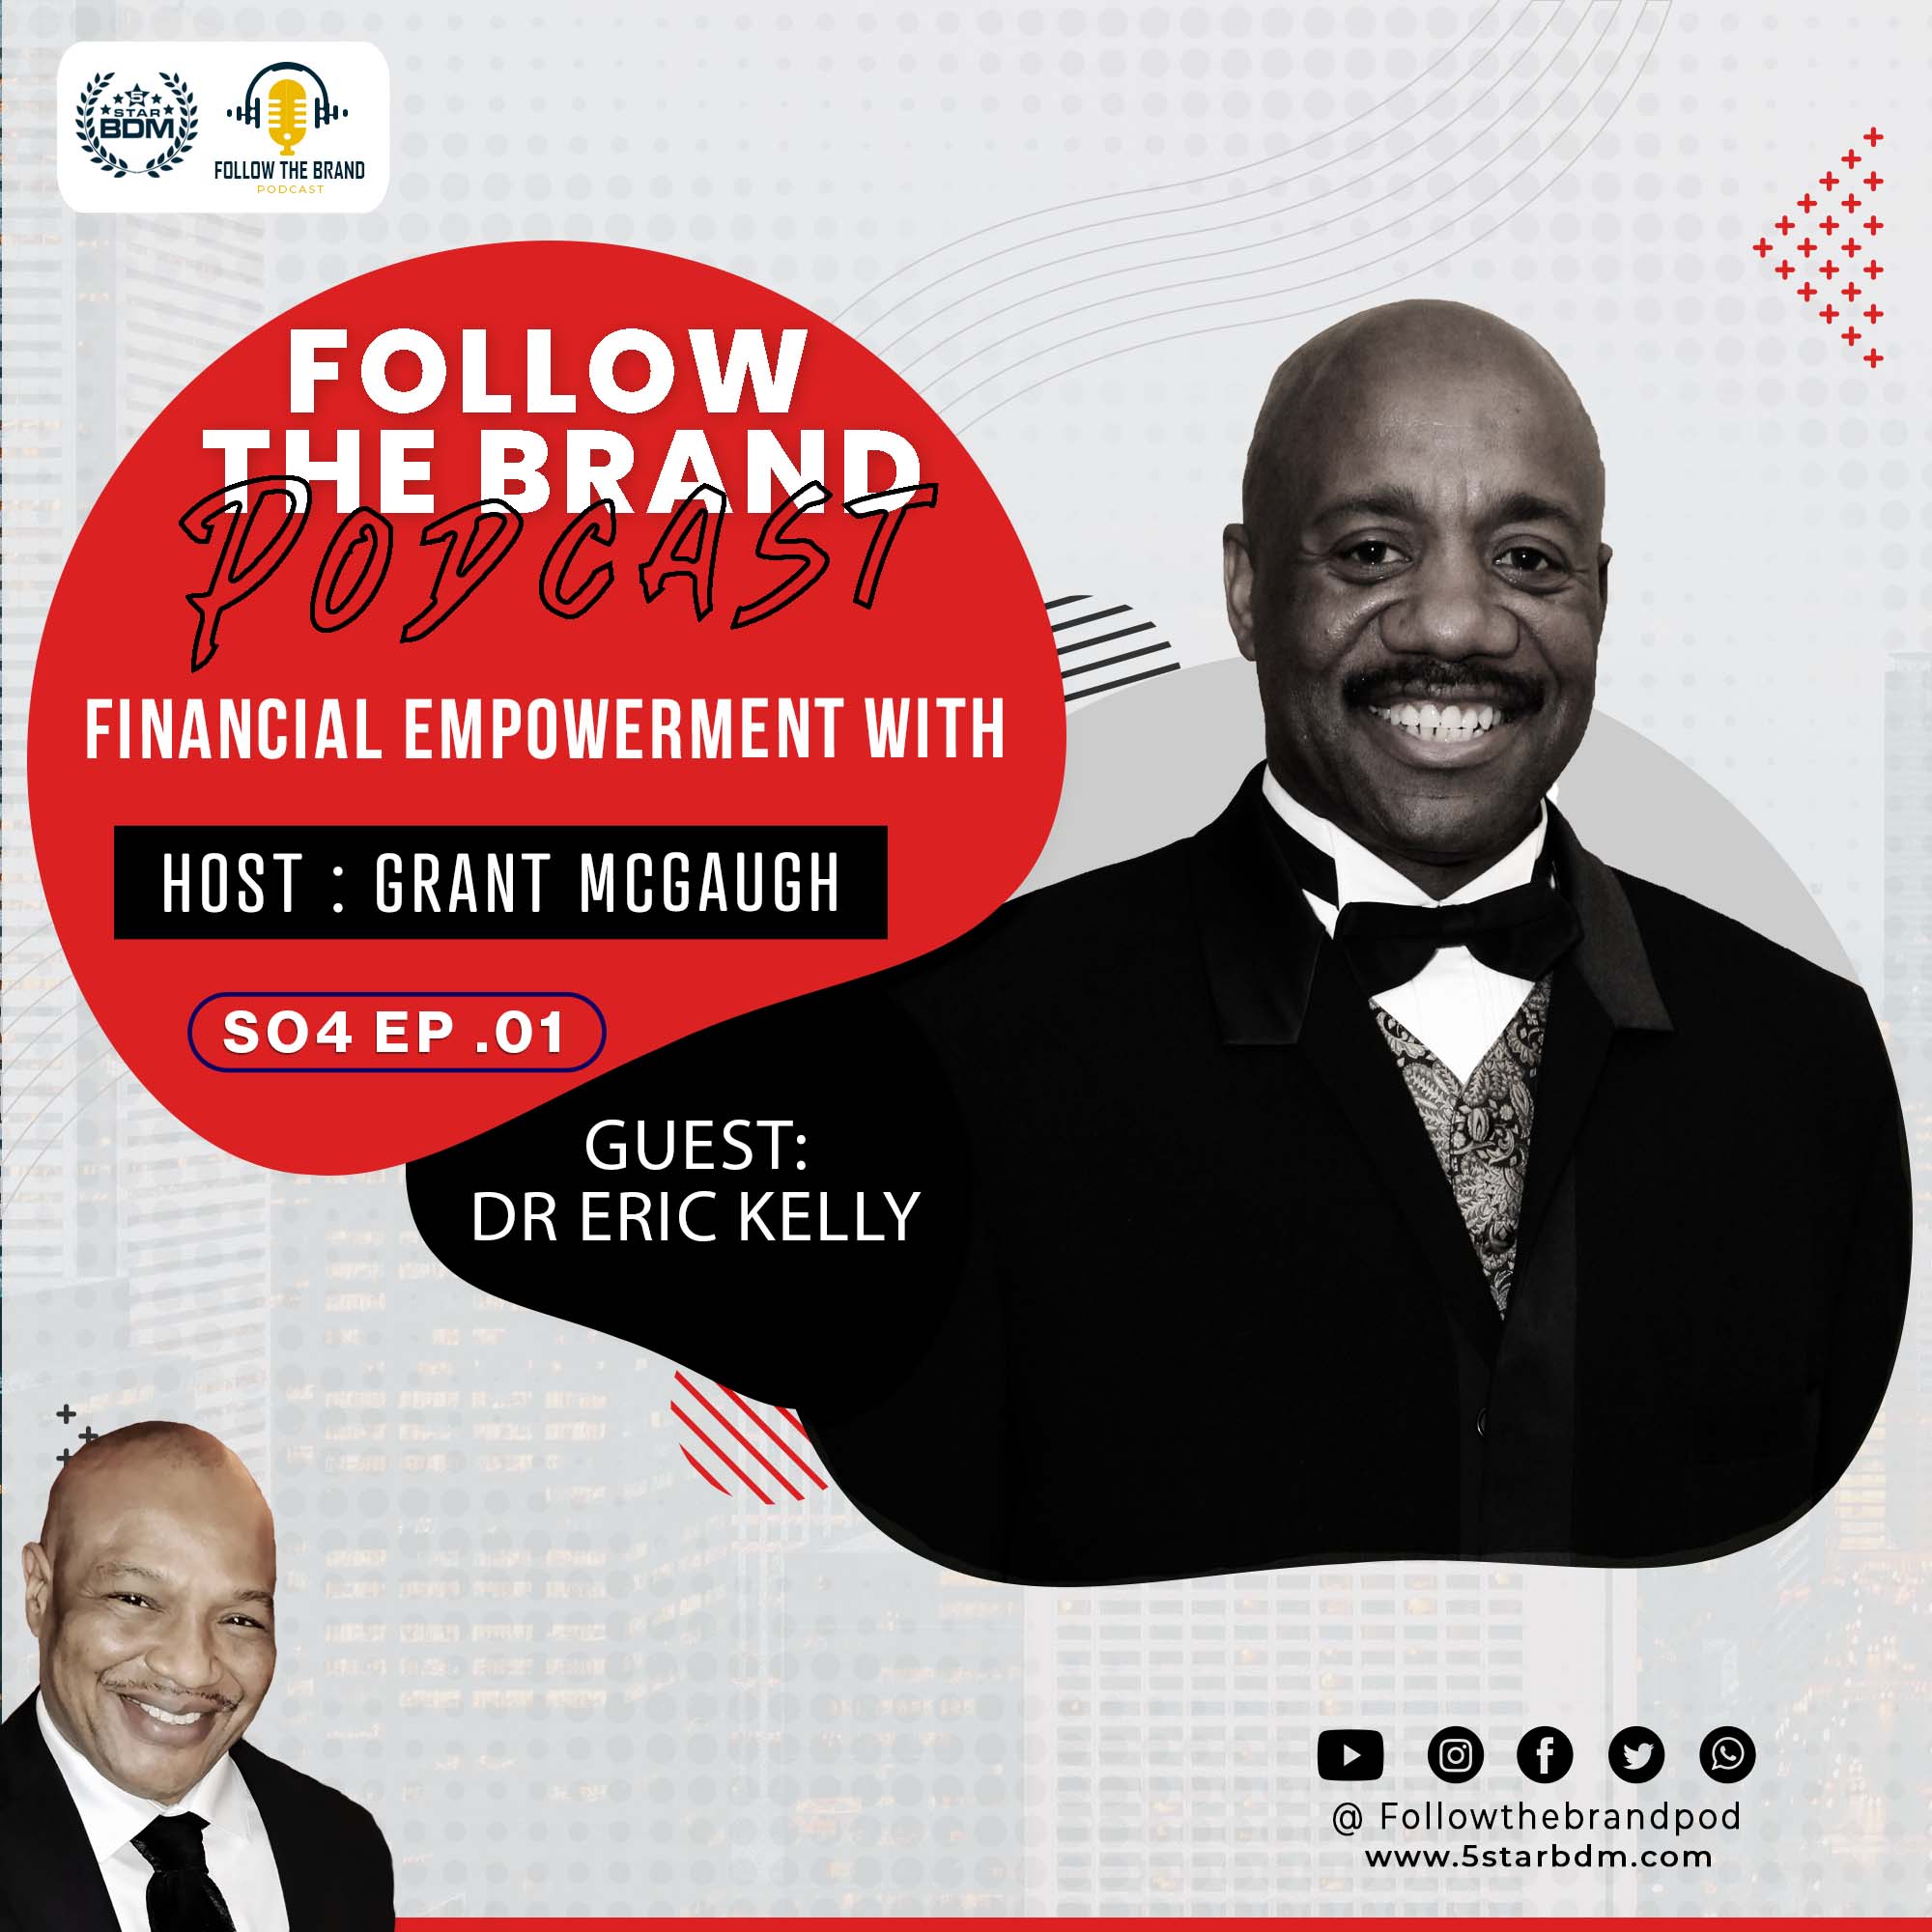 Entrepreneurial Pursuits Featuring Dr Eric Kelly CEO of Black Business Expo USA